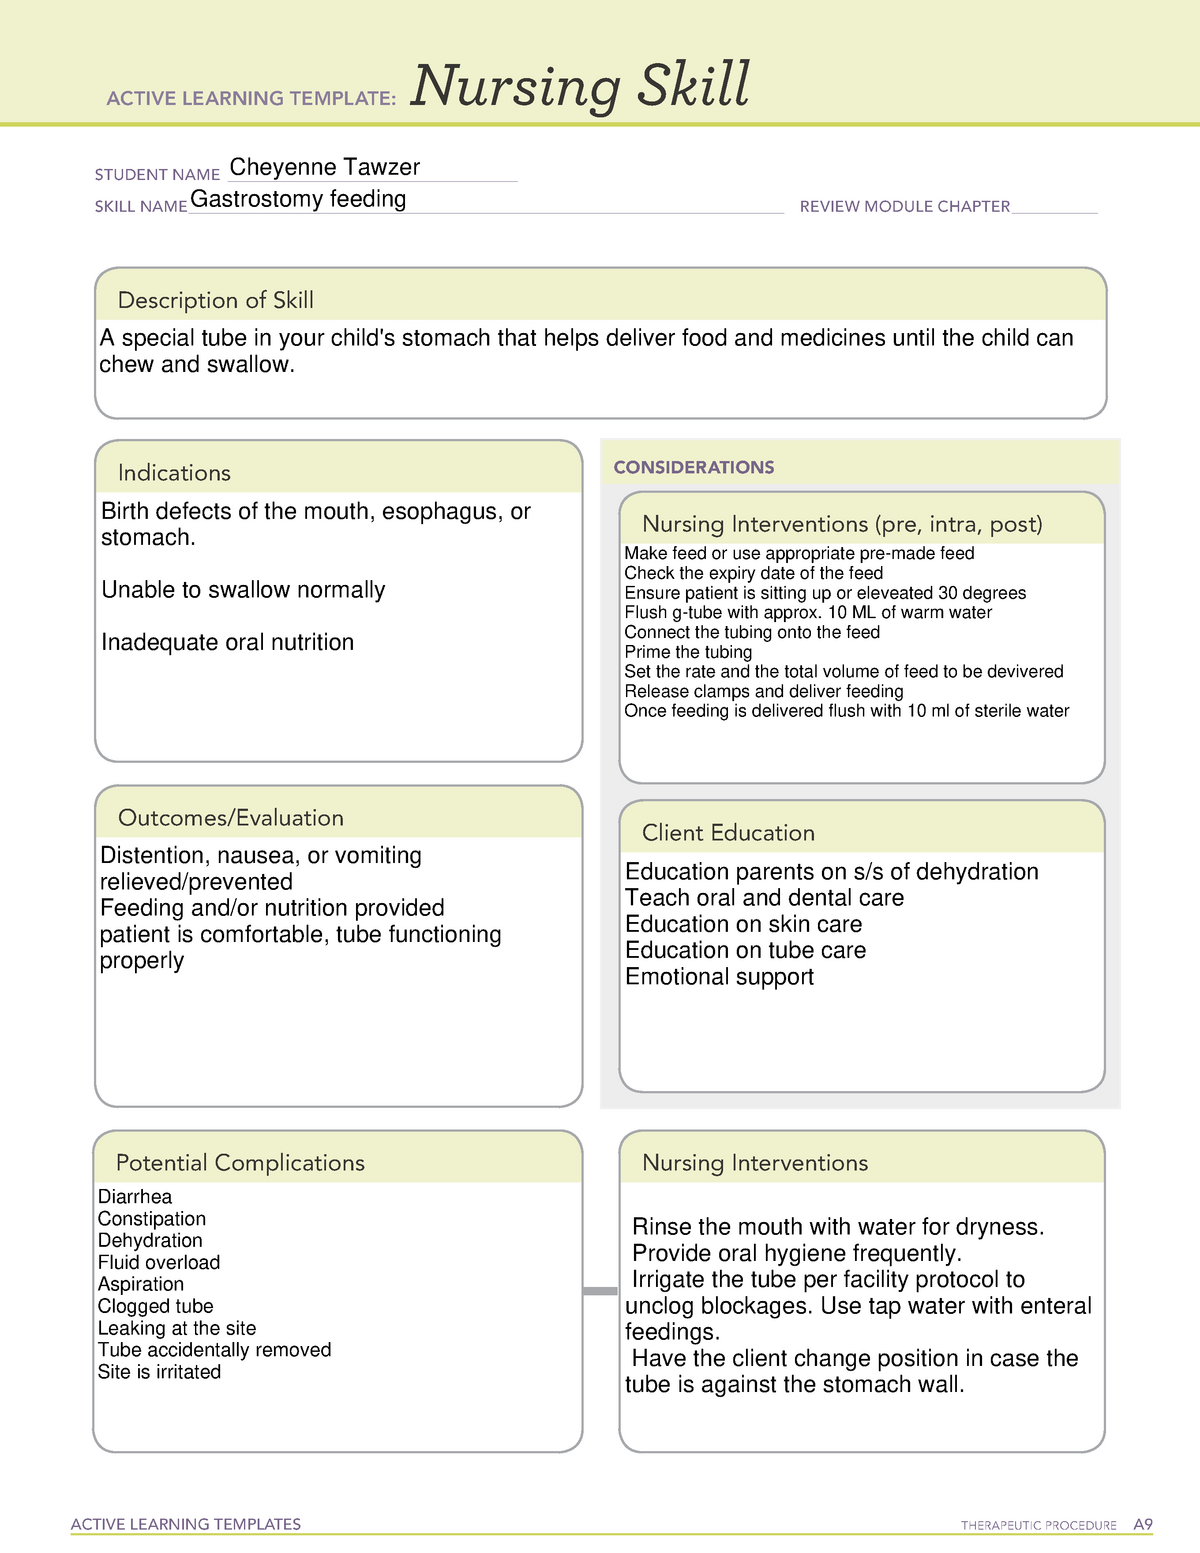 nursing-skill-form-active-learning-templates-therapeutic-procedure-a-vrogue